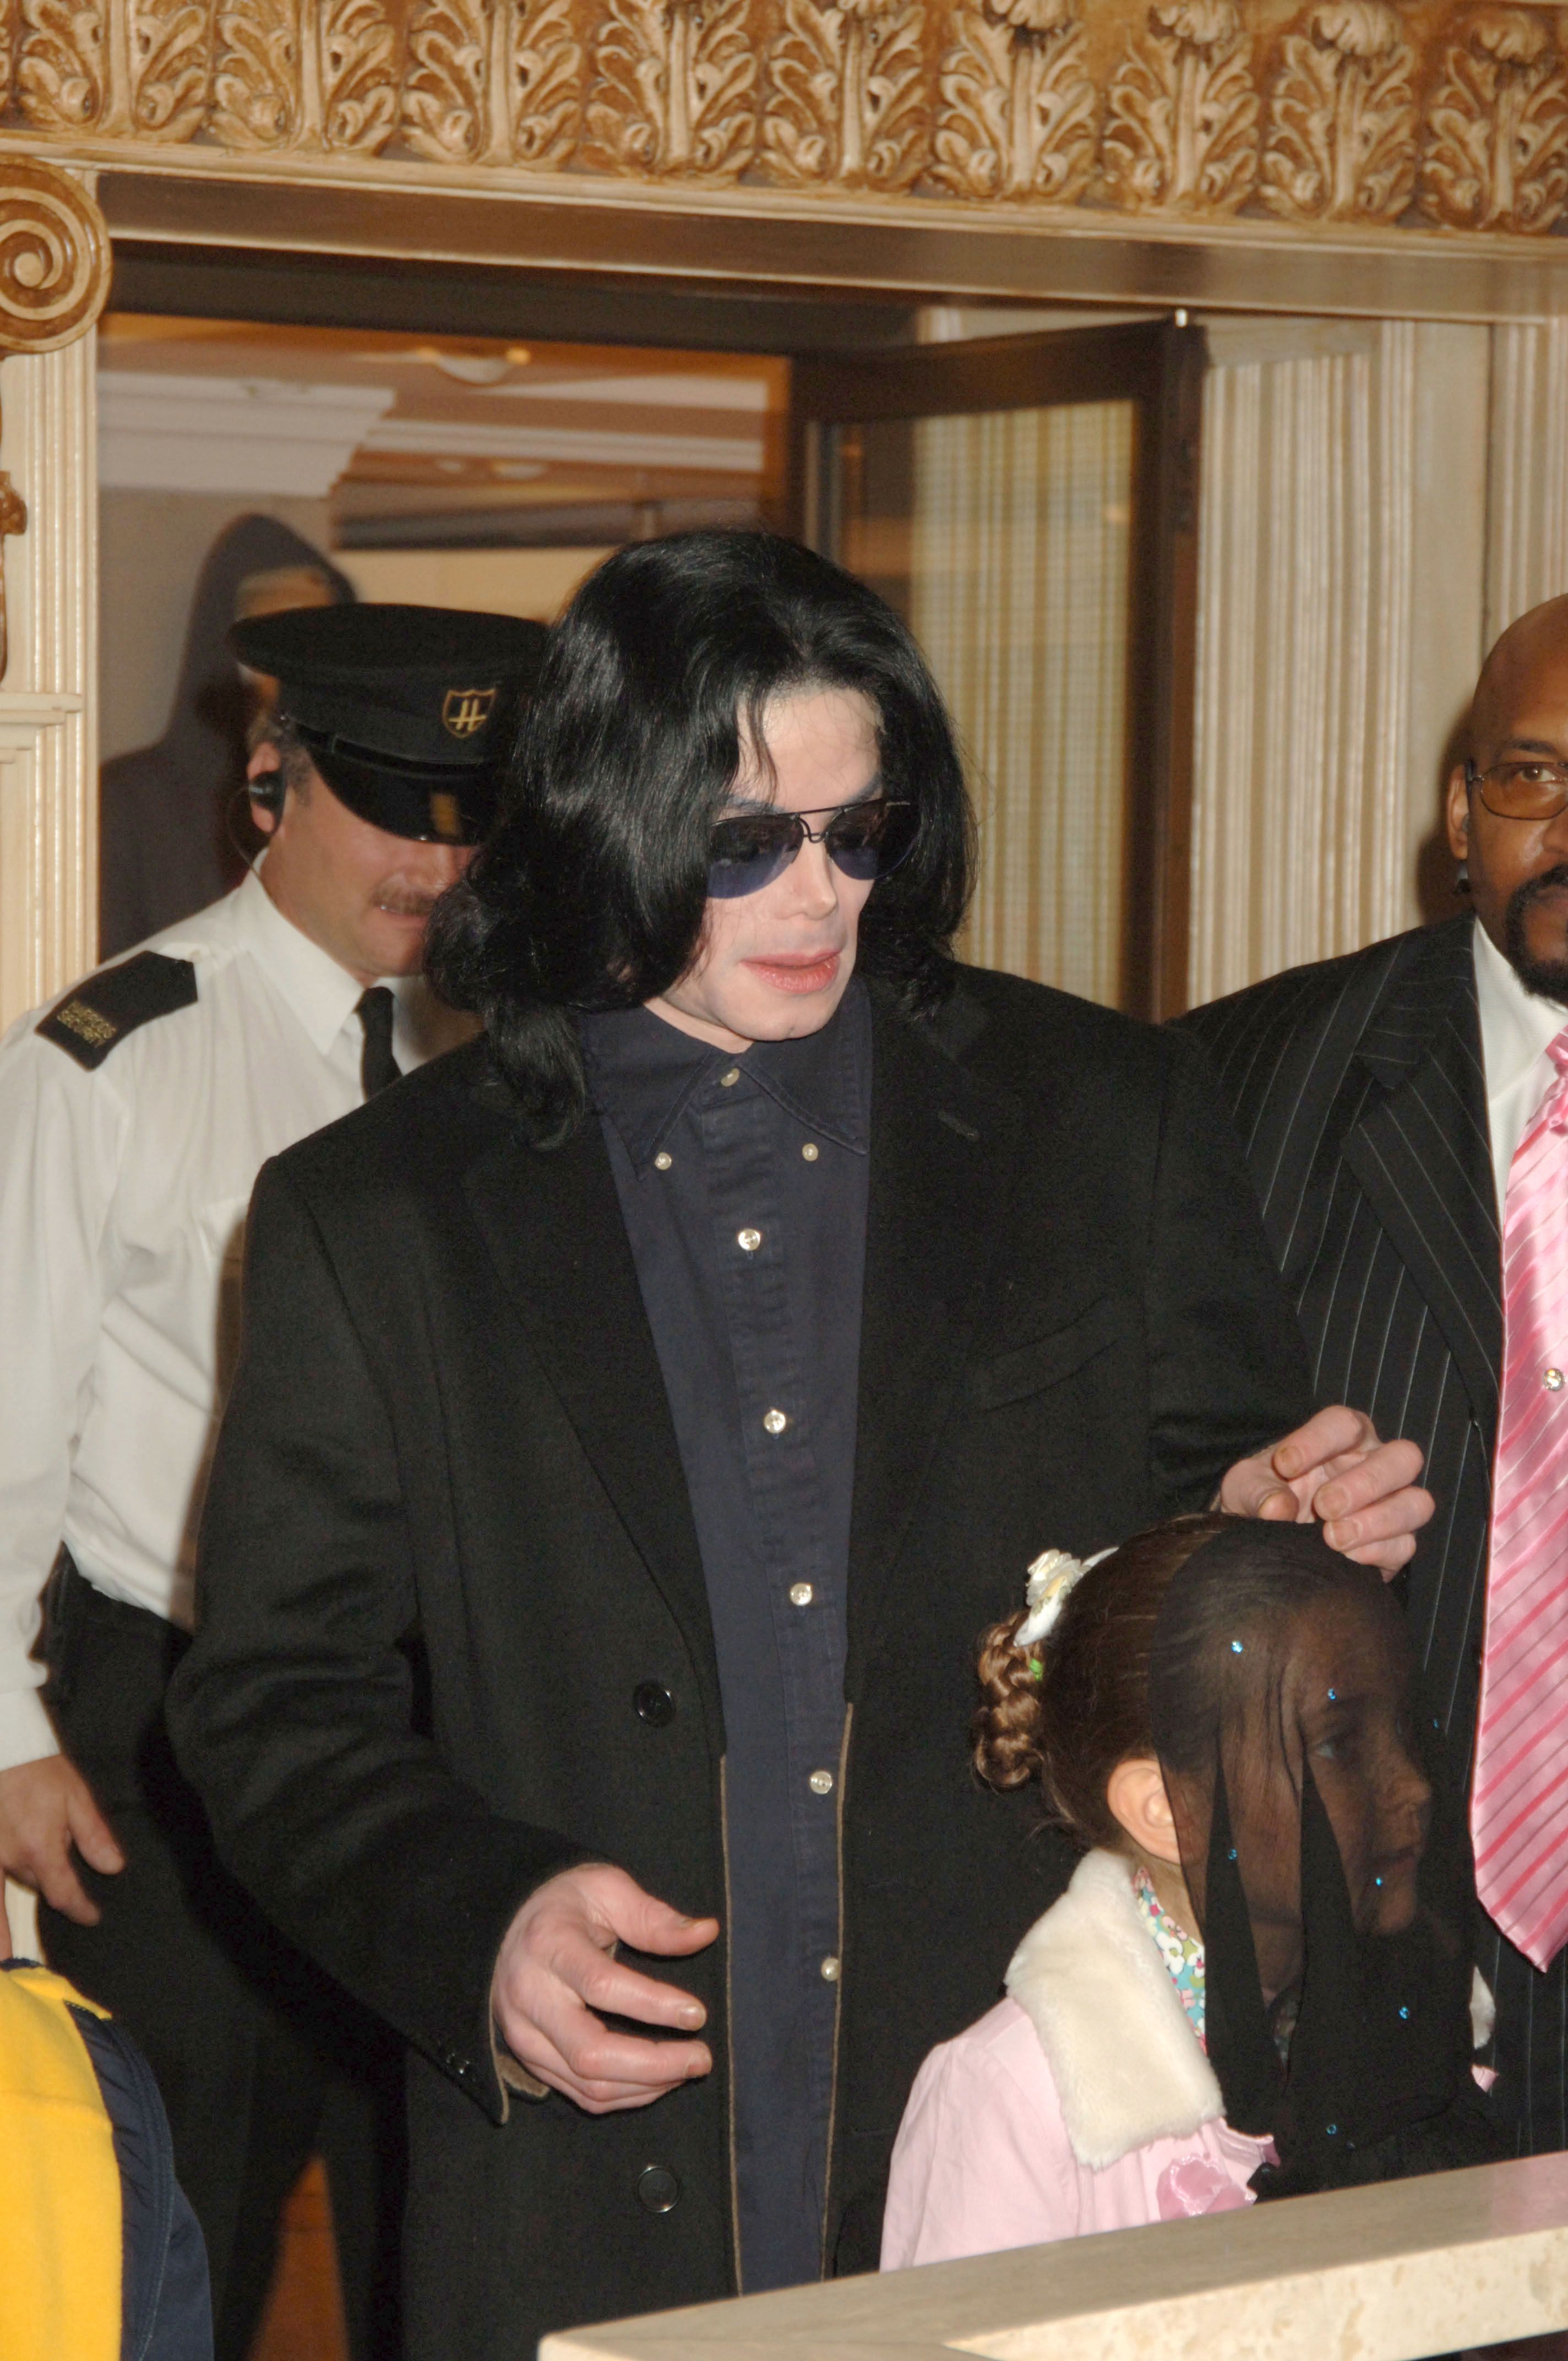 The late Michael Jackson and his daughter, Paris, as they visit Harrods October 12, 2005 in London, England. | Photo: Getty Images